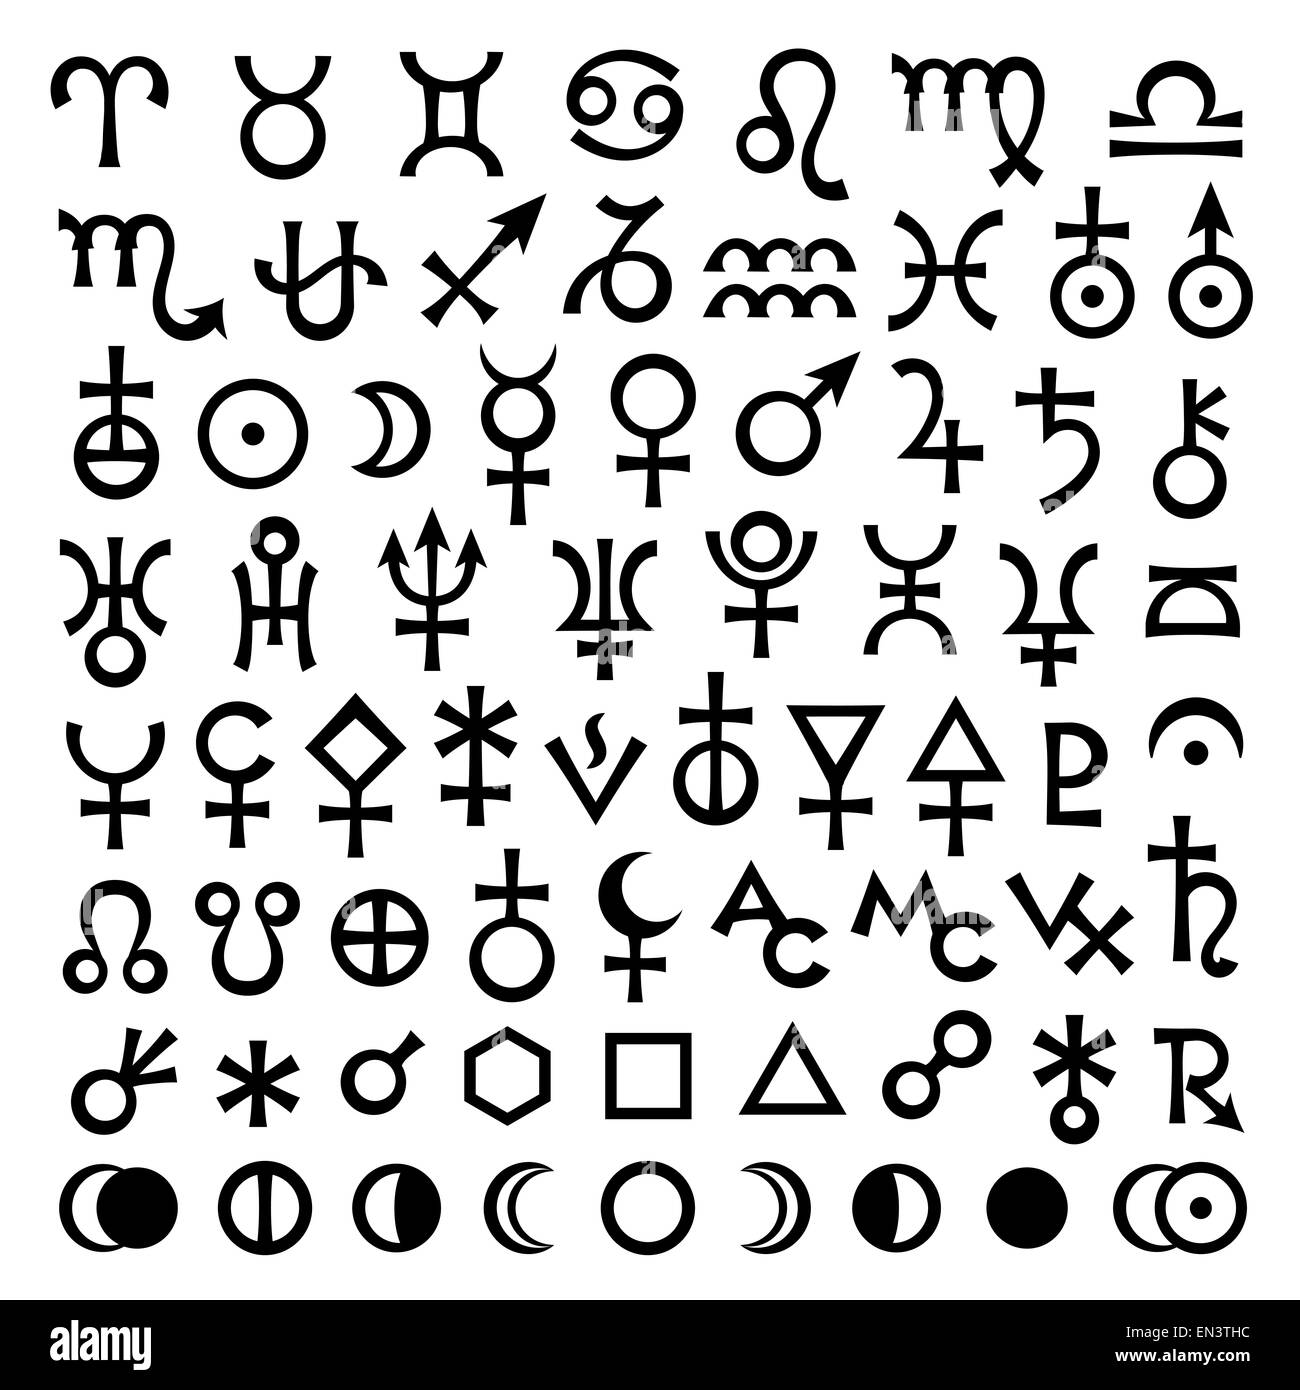 Astrological Signs of Zodiac, Planets, Asteroids, Aspects, Lunar phases, etc. (The Big Set of Main Astrological Symbols) v.2 Stock Photo